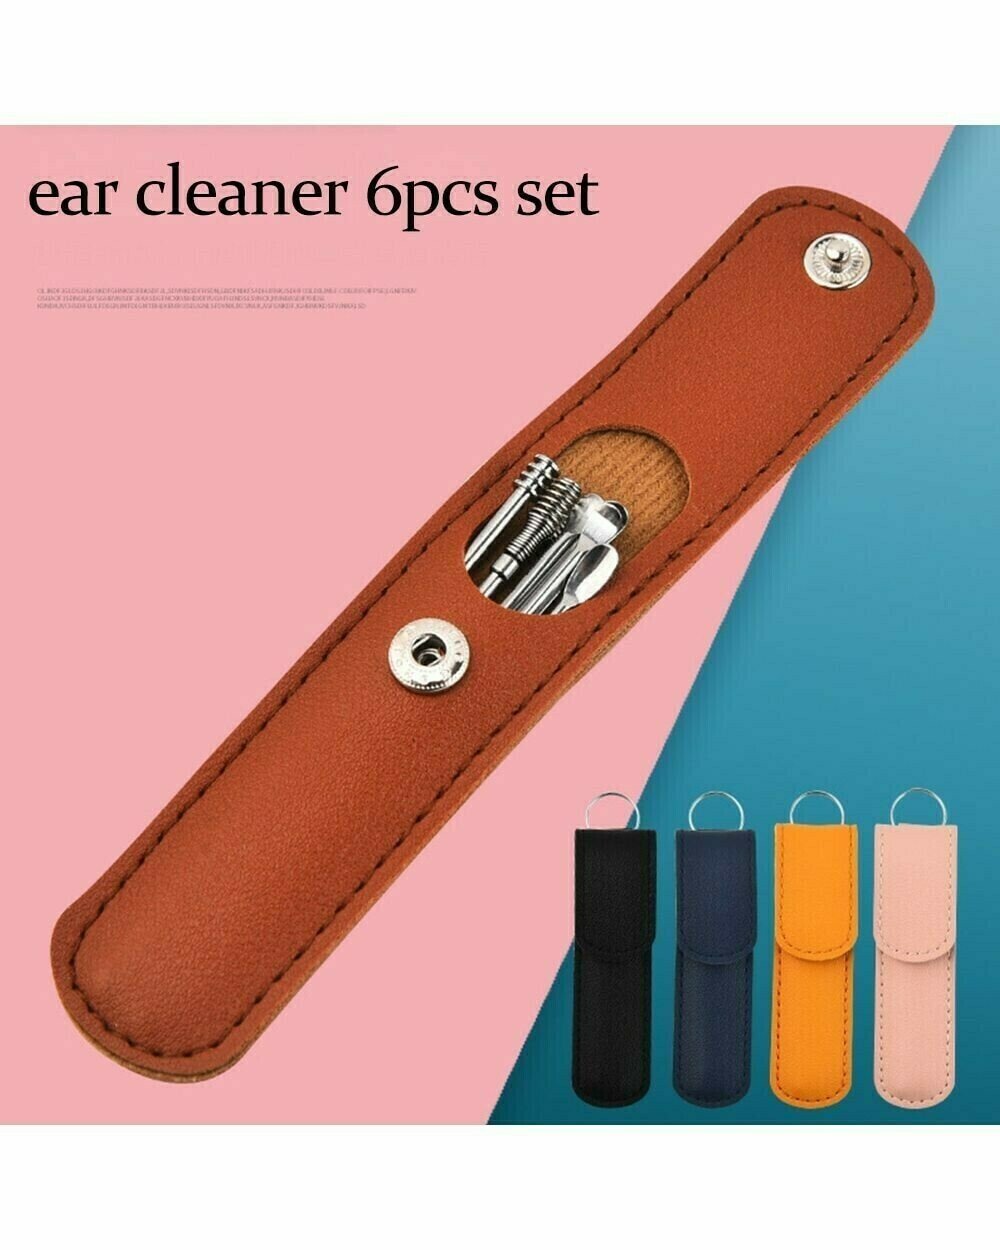 Innovative Spring EarWax Cleaner Tool Set